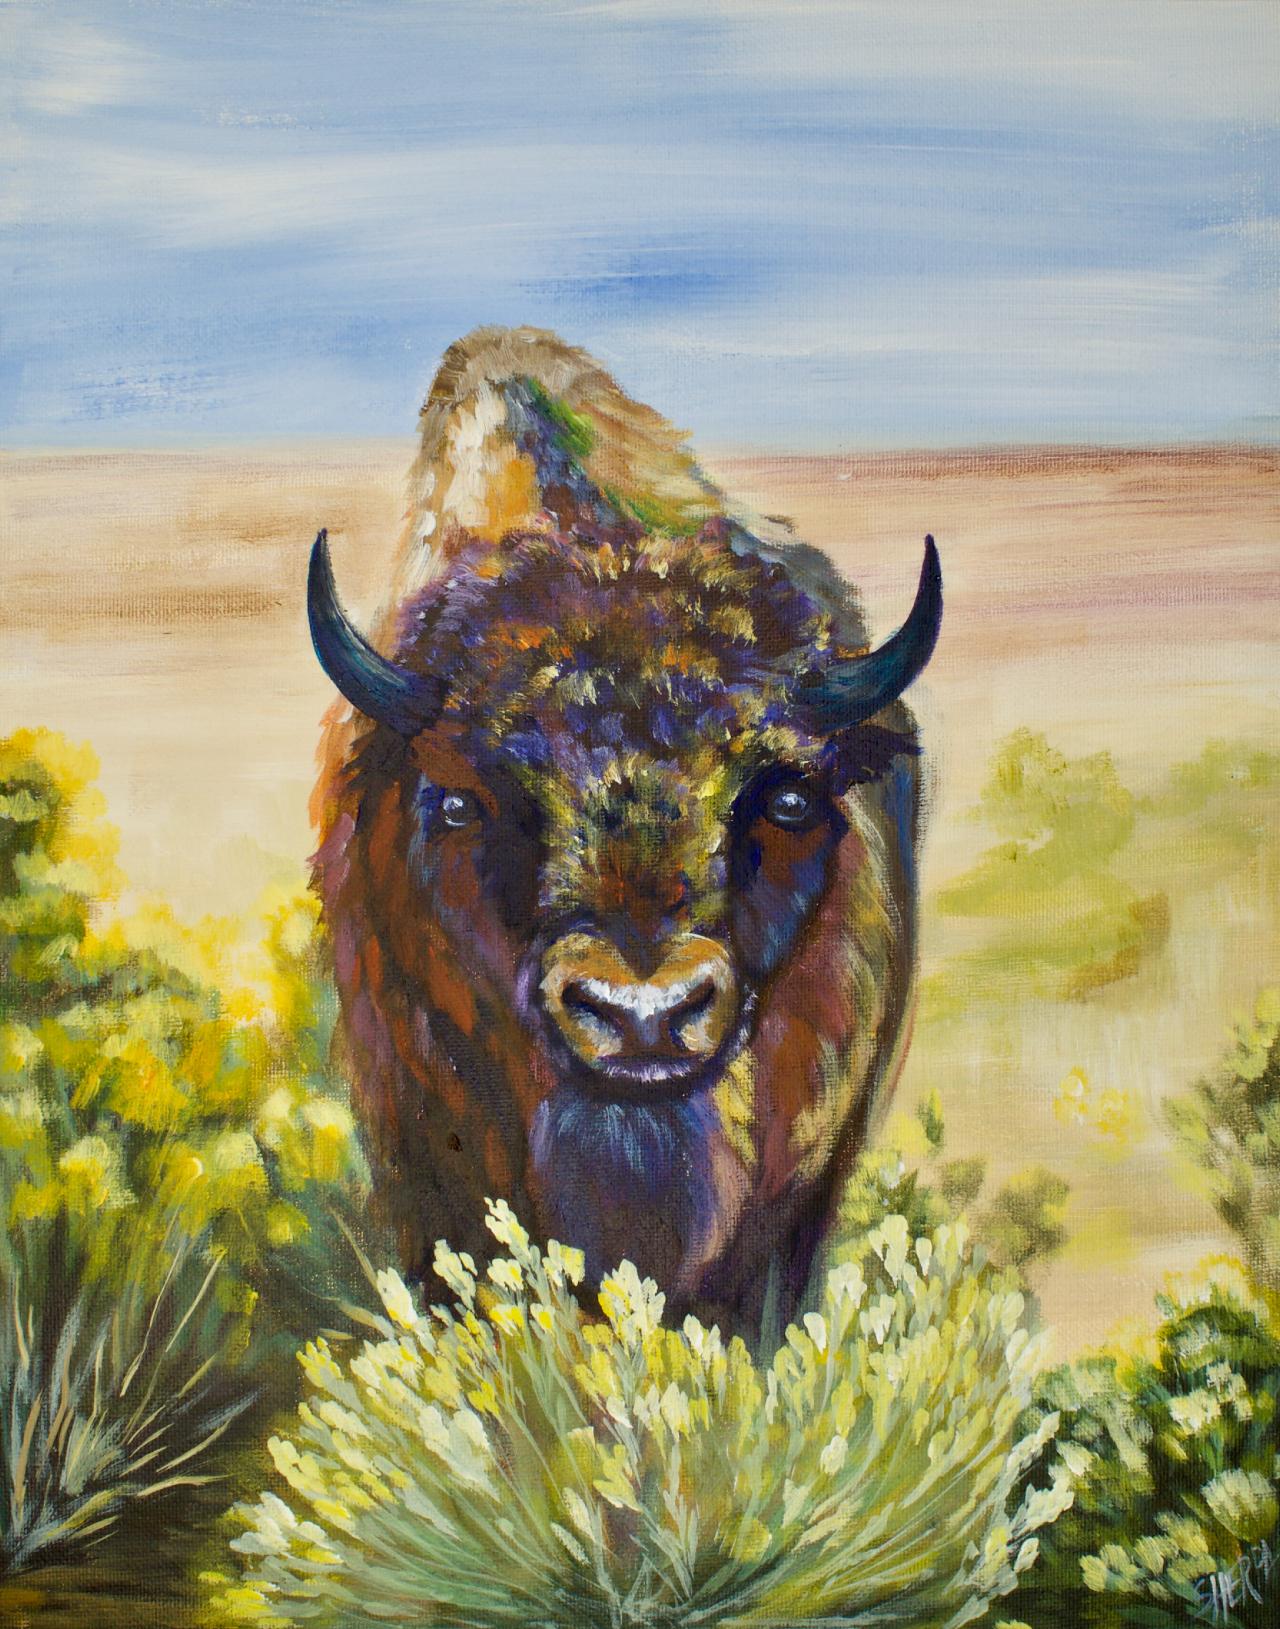 How To Paint An American Bison Acrylic On Canvas For Beginning Artists With The Art Sherpa - Gallery - The Art Sherpa Community | The Art Sherpa